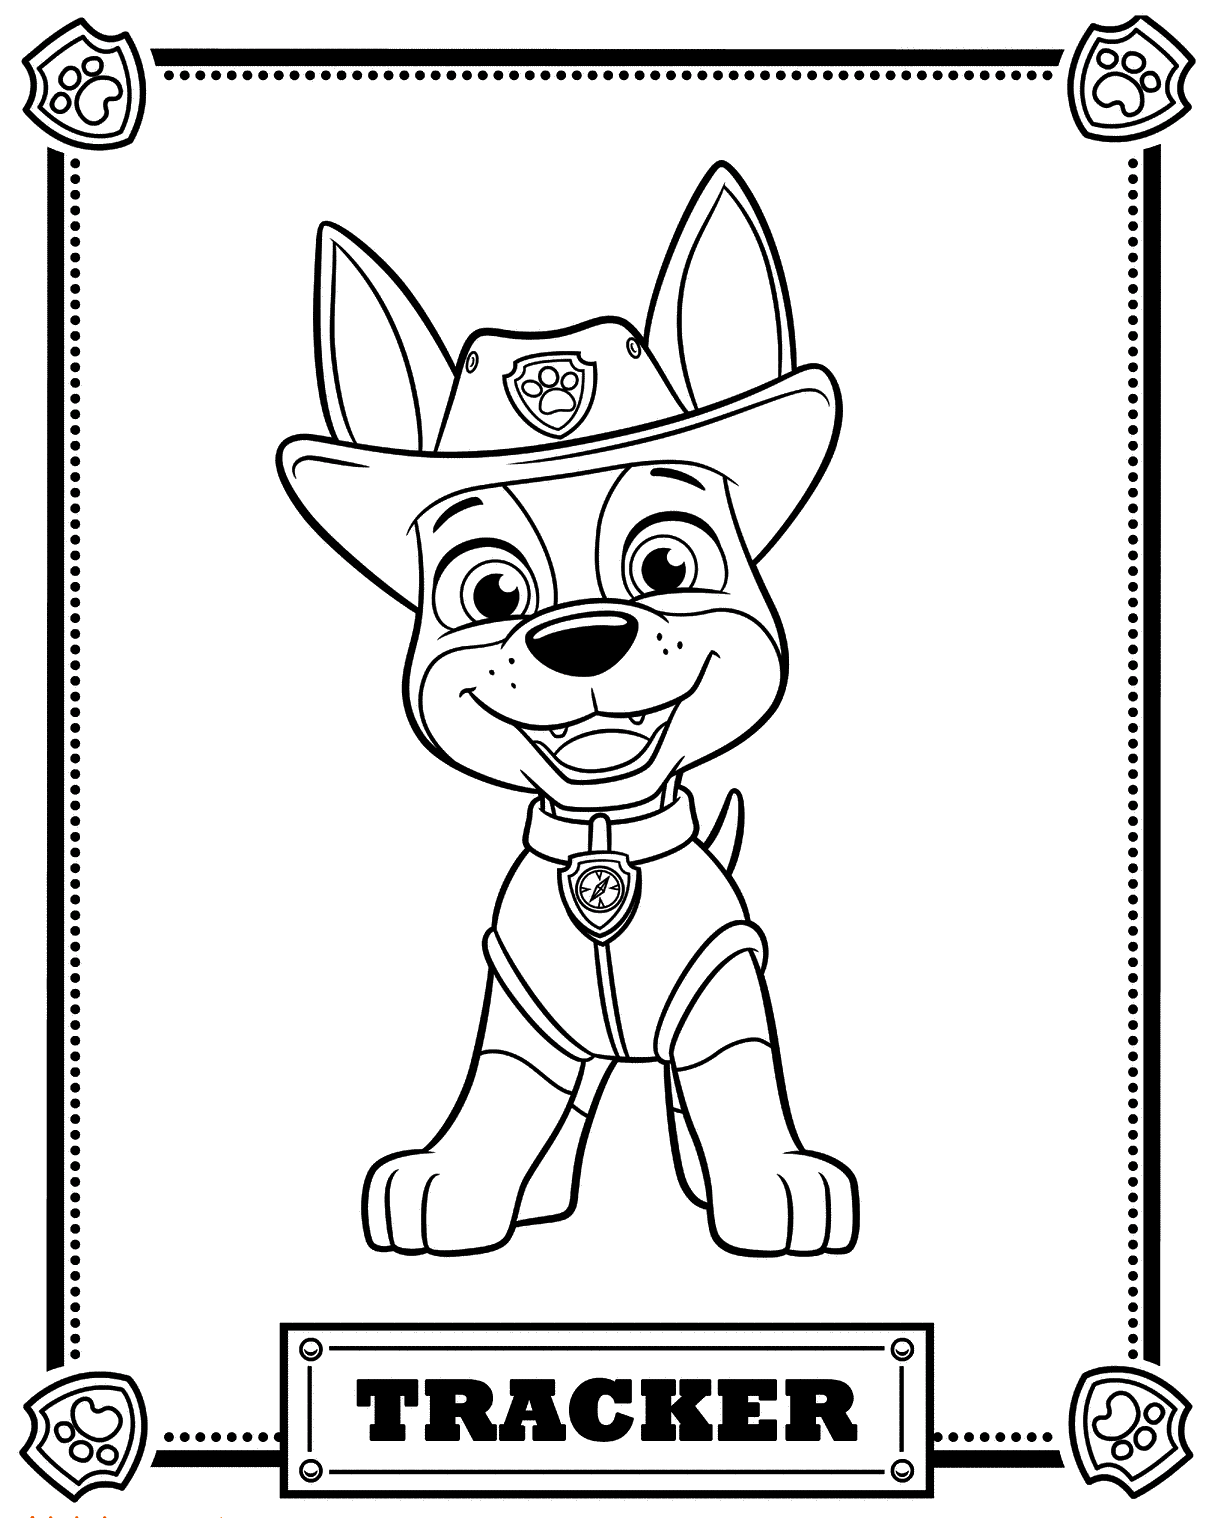 Top 10 PAW Patrol Coloring Pages | Paw patrol coloring pages, Paw ...